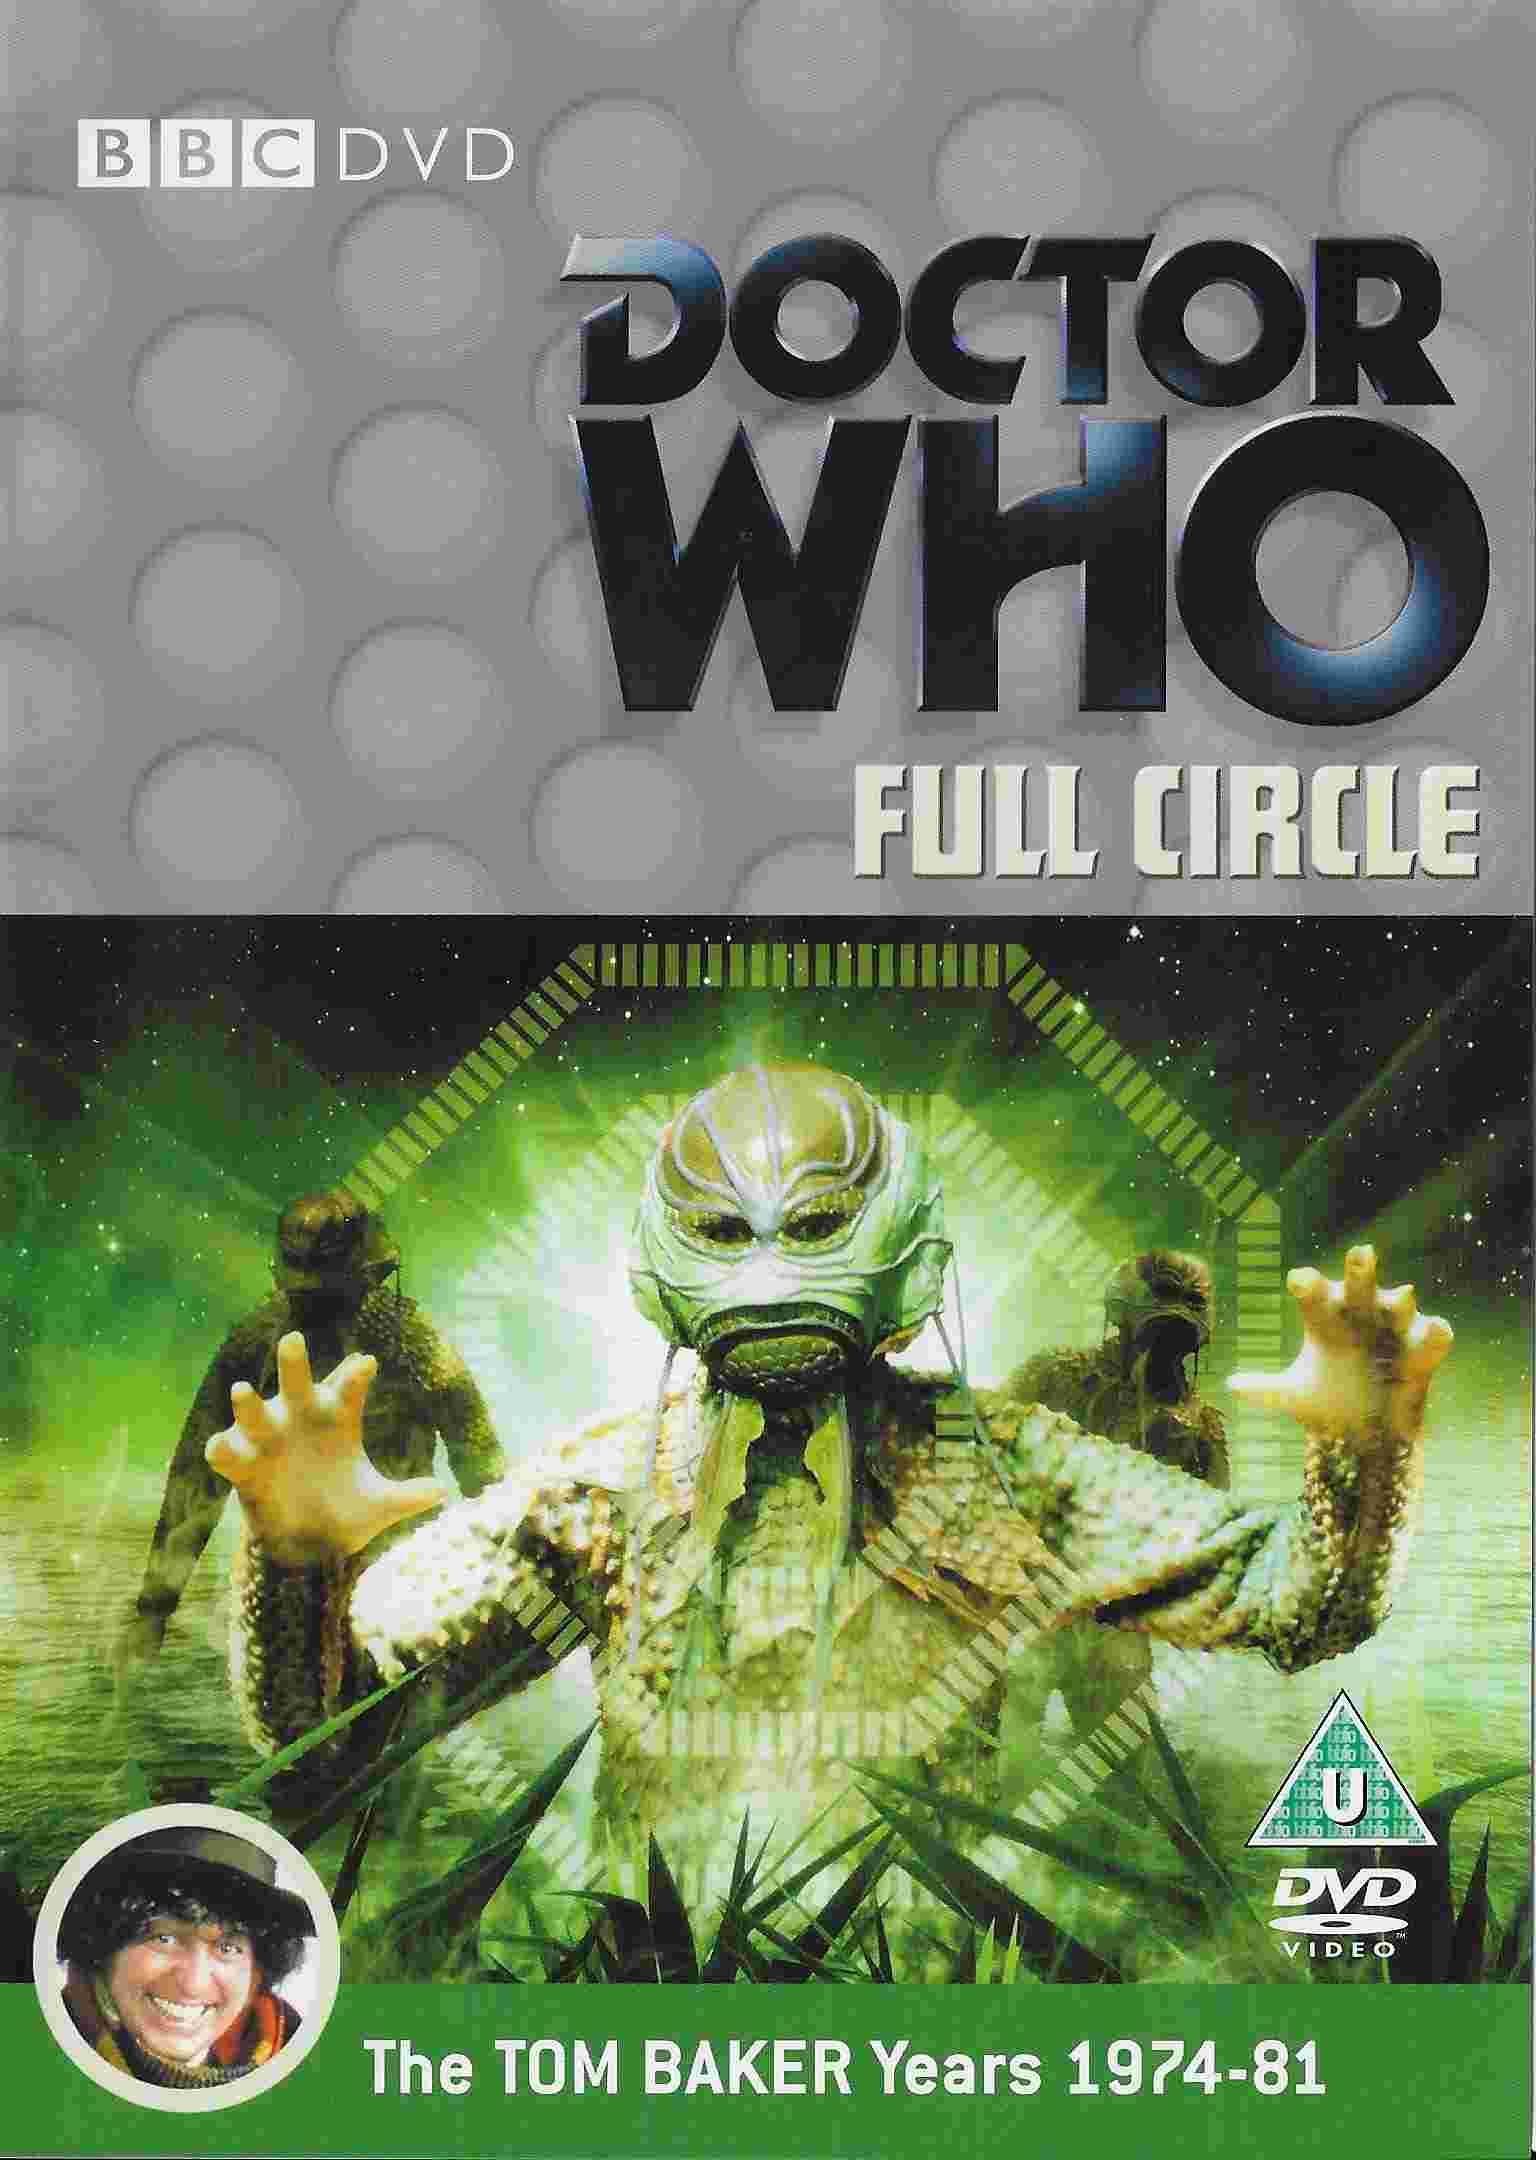 Picture of BBCDVD 1835A Doctor Who - Full Circle by artist Andrew Smith from the BBC records and Tapes library